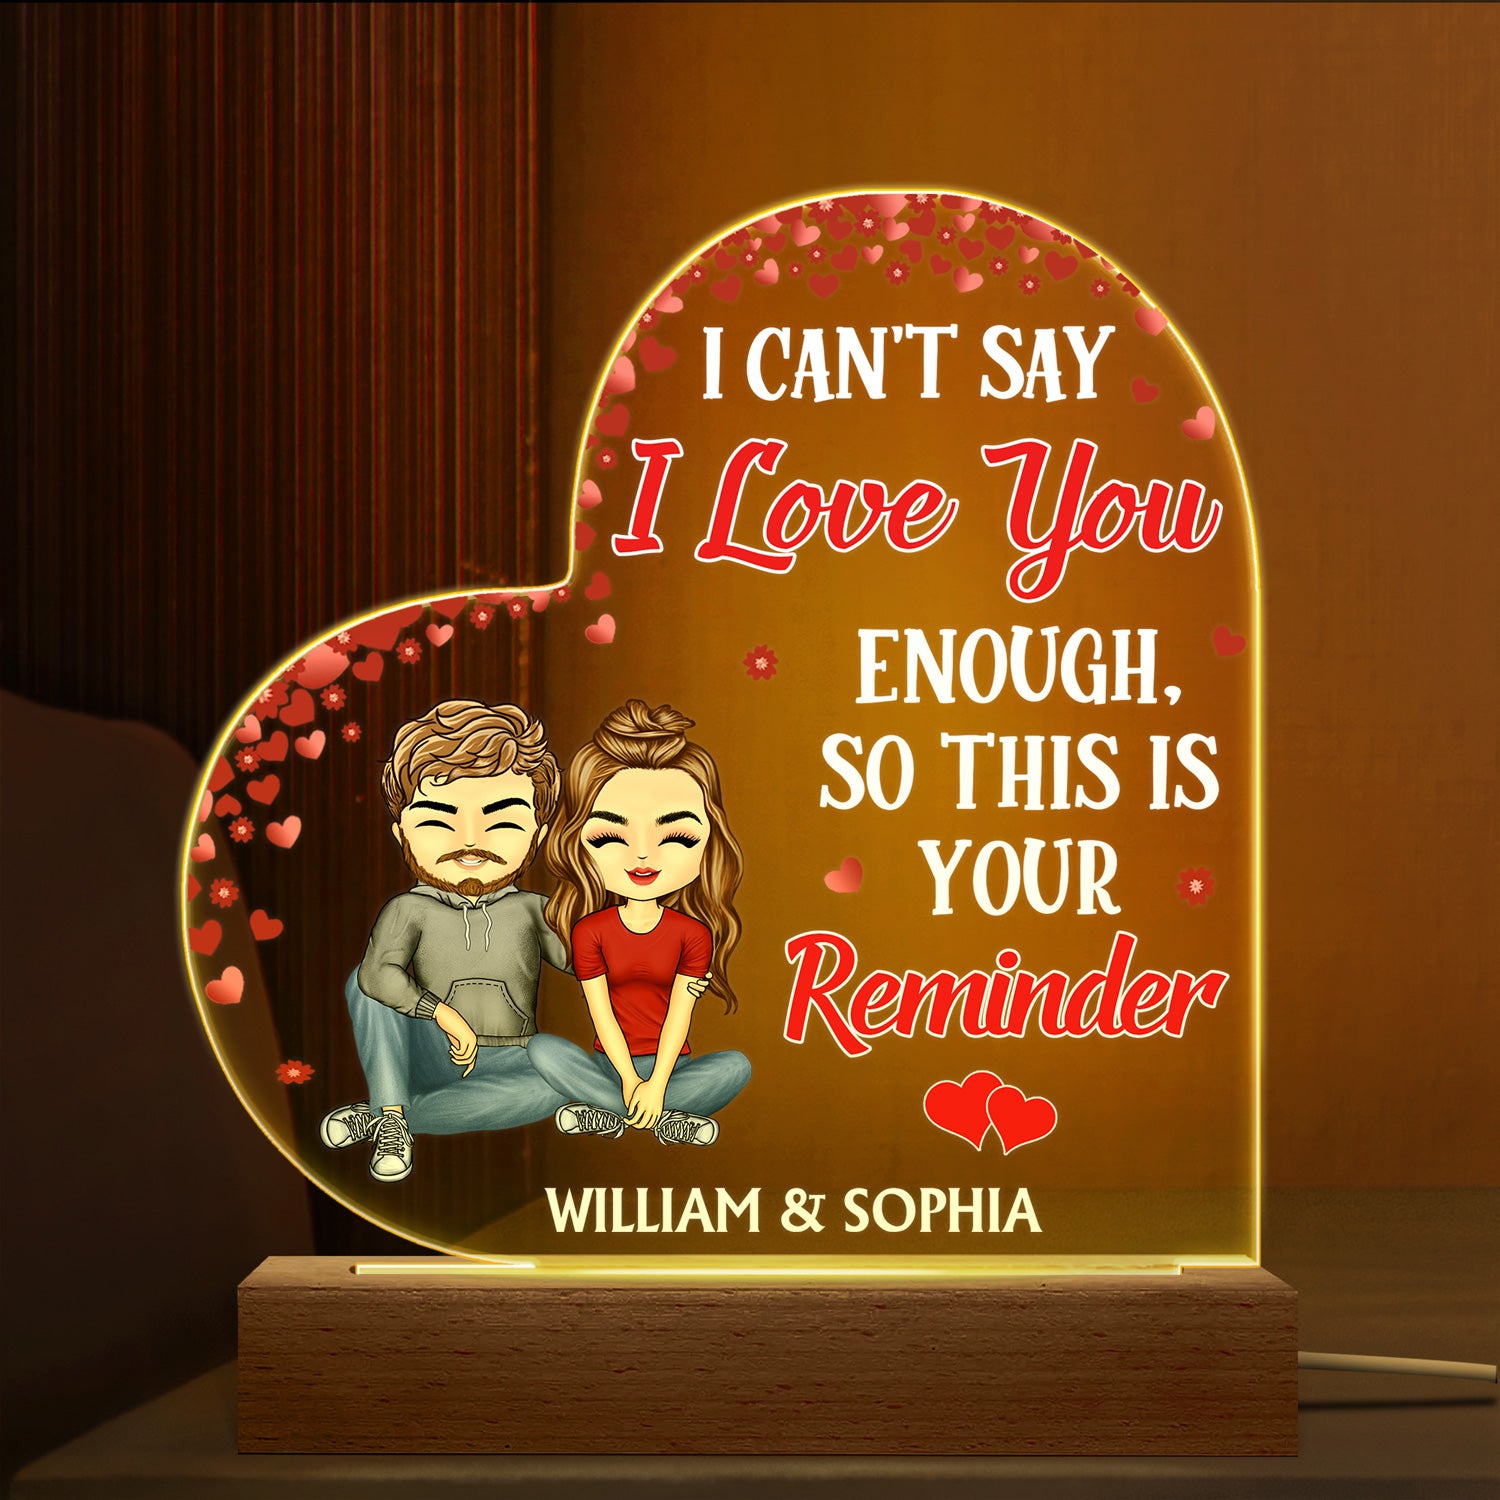 I Can't Say I Love You Enough So This Is Your Reminder Couple - Anniversary, Birthday, Housewarming Gift For Spouse, Husband, Wife, Family - Personalized Custom 3D Led Light Wooden Base